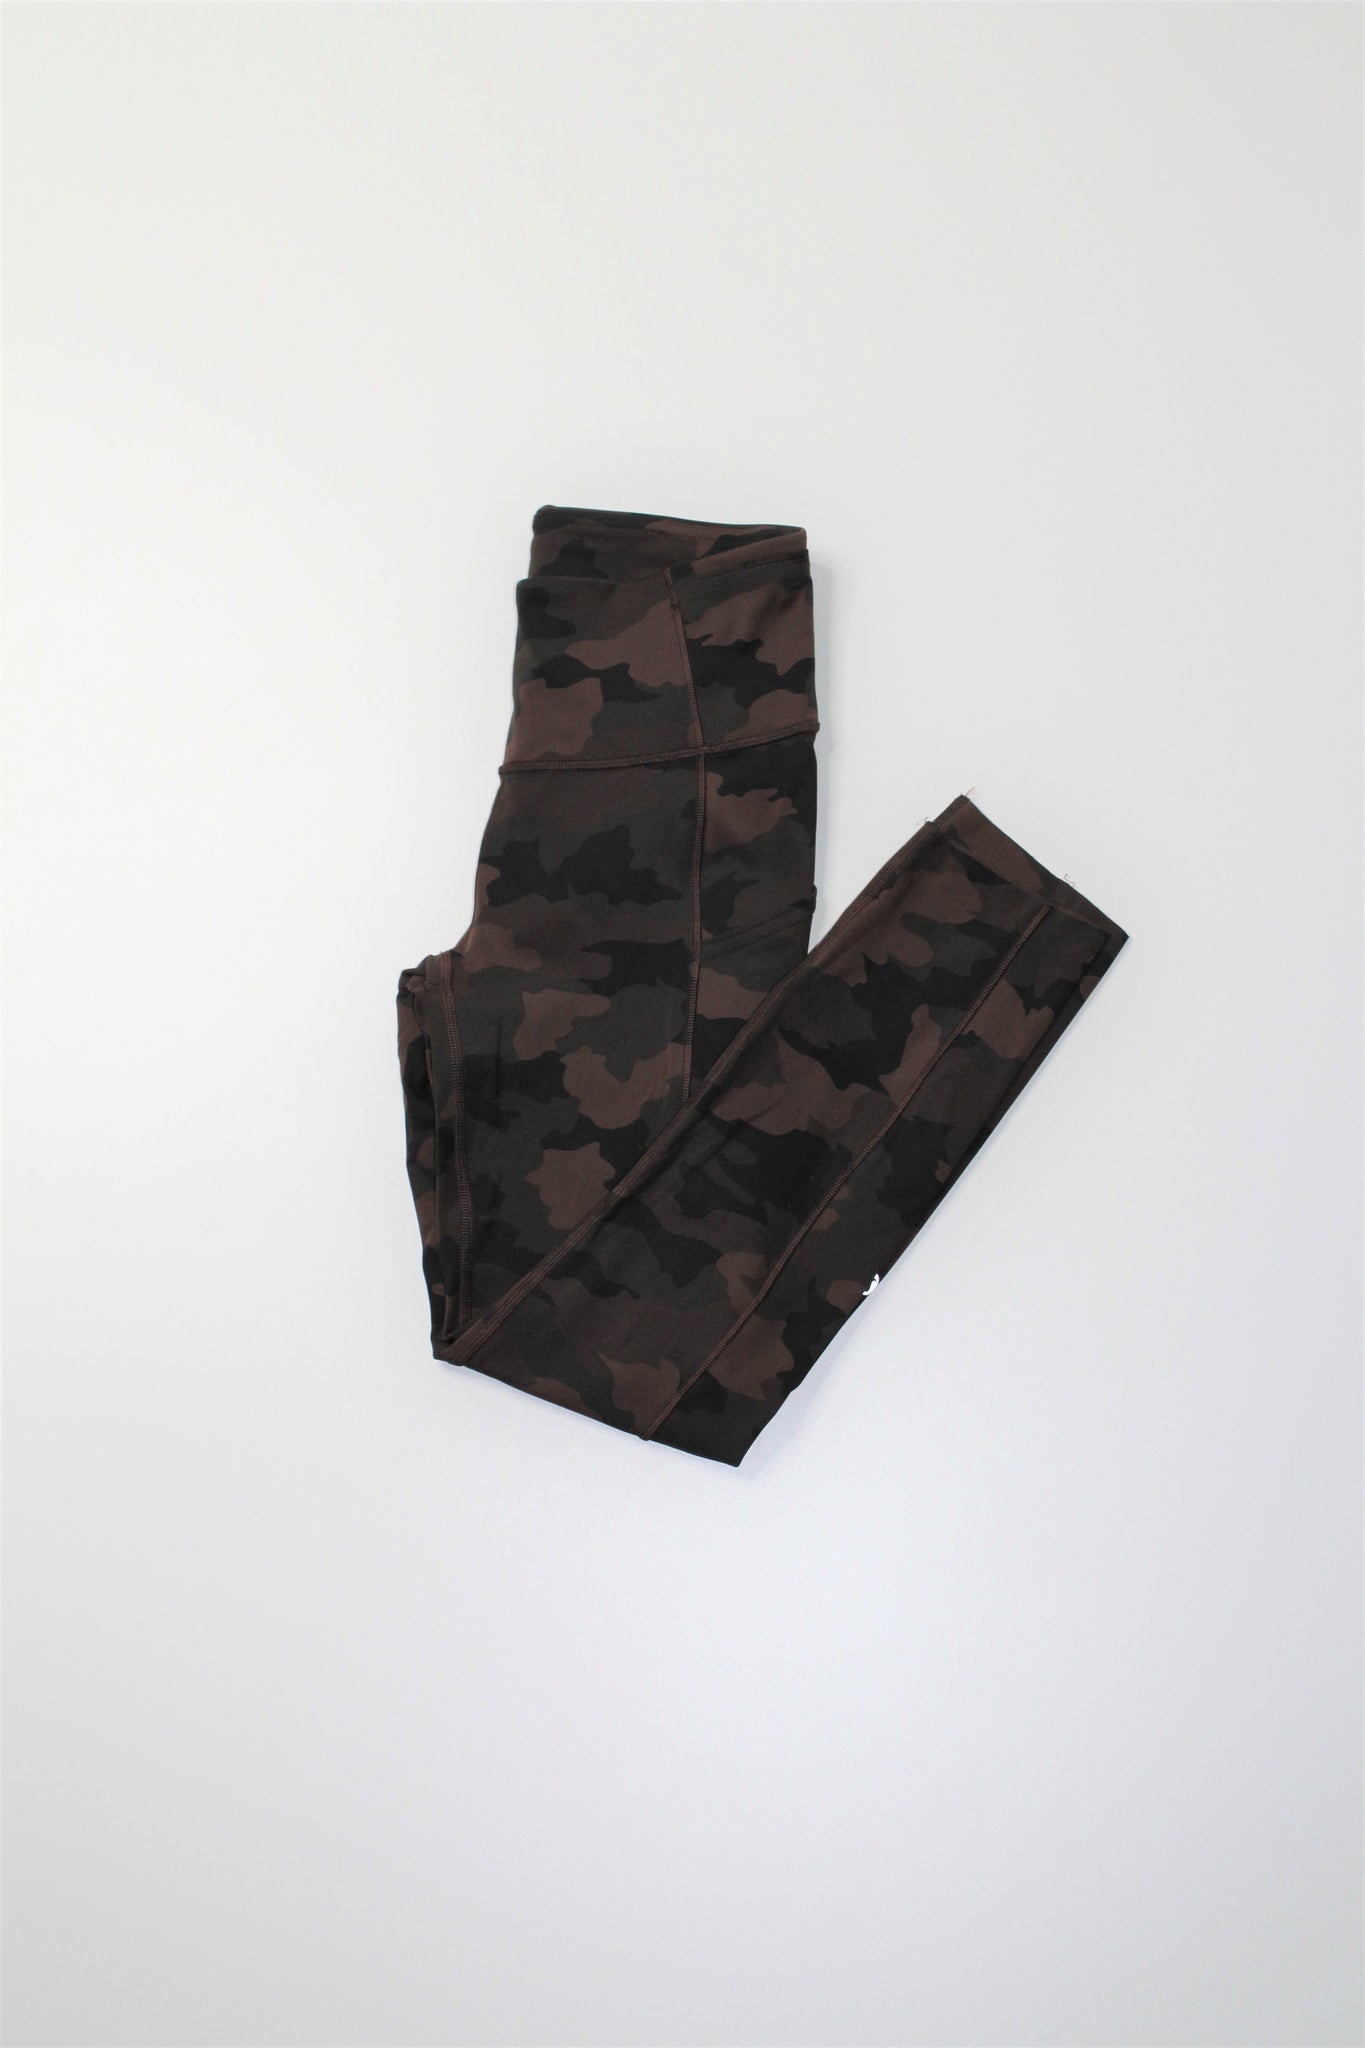 Lululemon 365 heritage camo brown earth multi fast and free tight